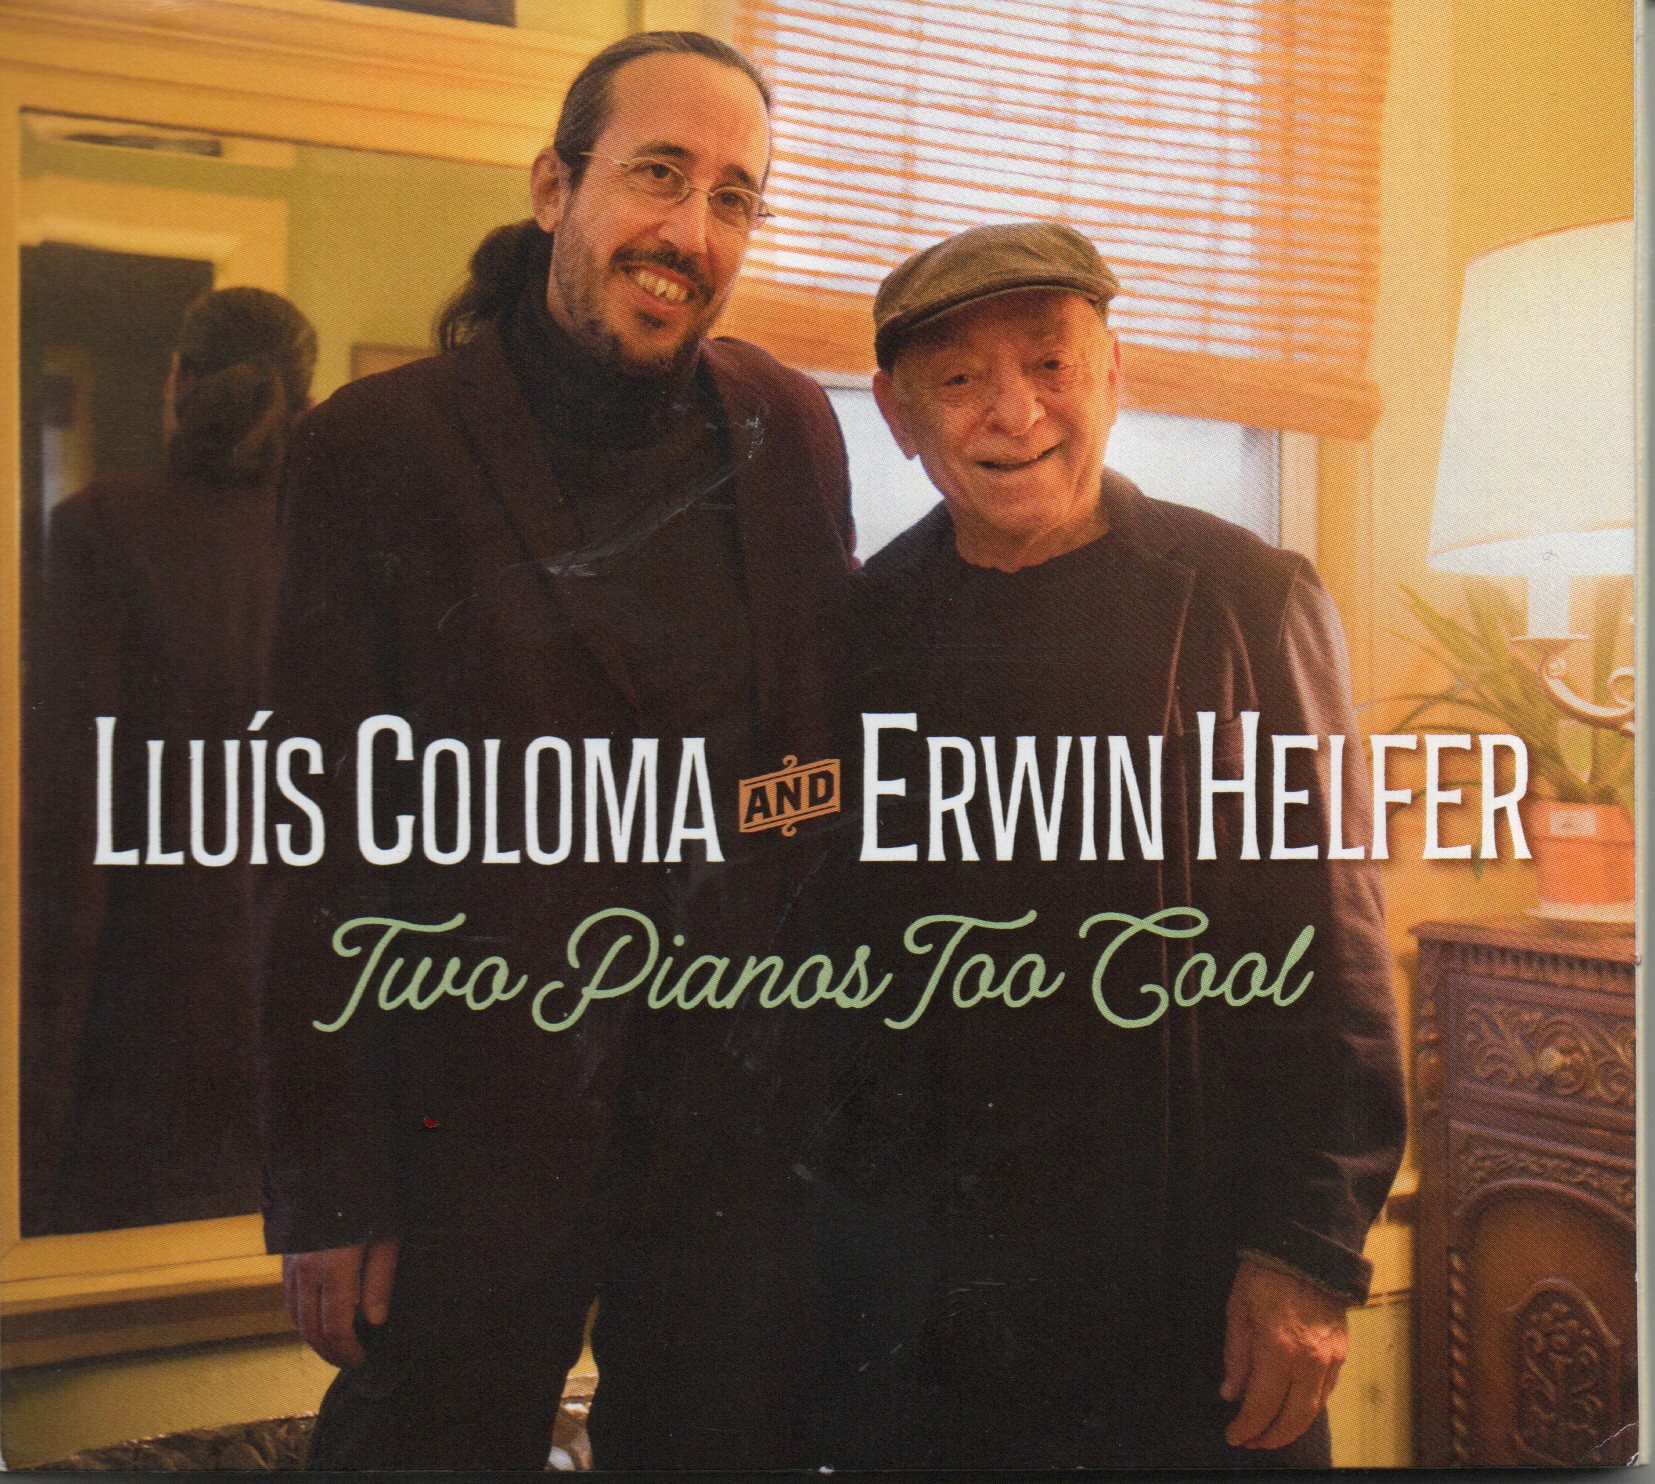 LLuis Coloma & Erwin Helfer "Two Pianos Too Cool"